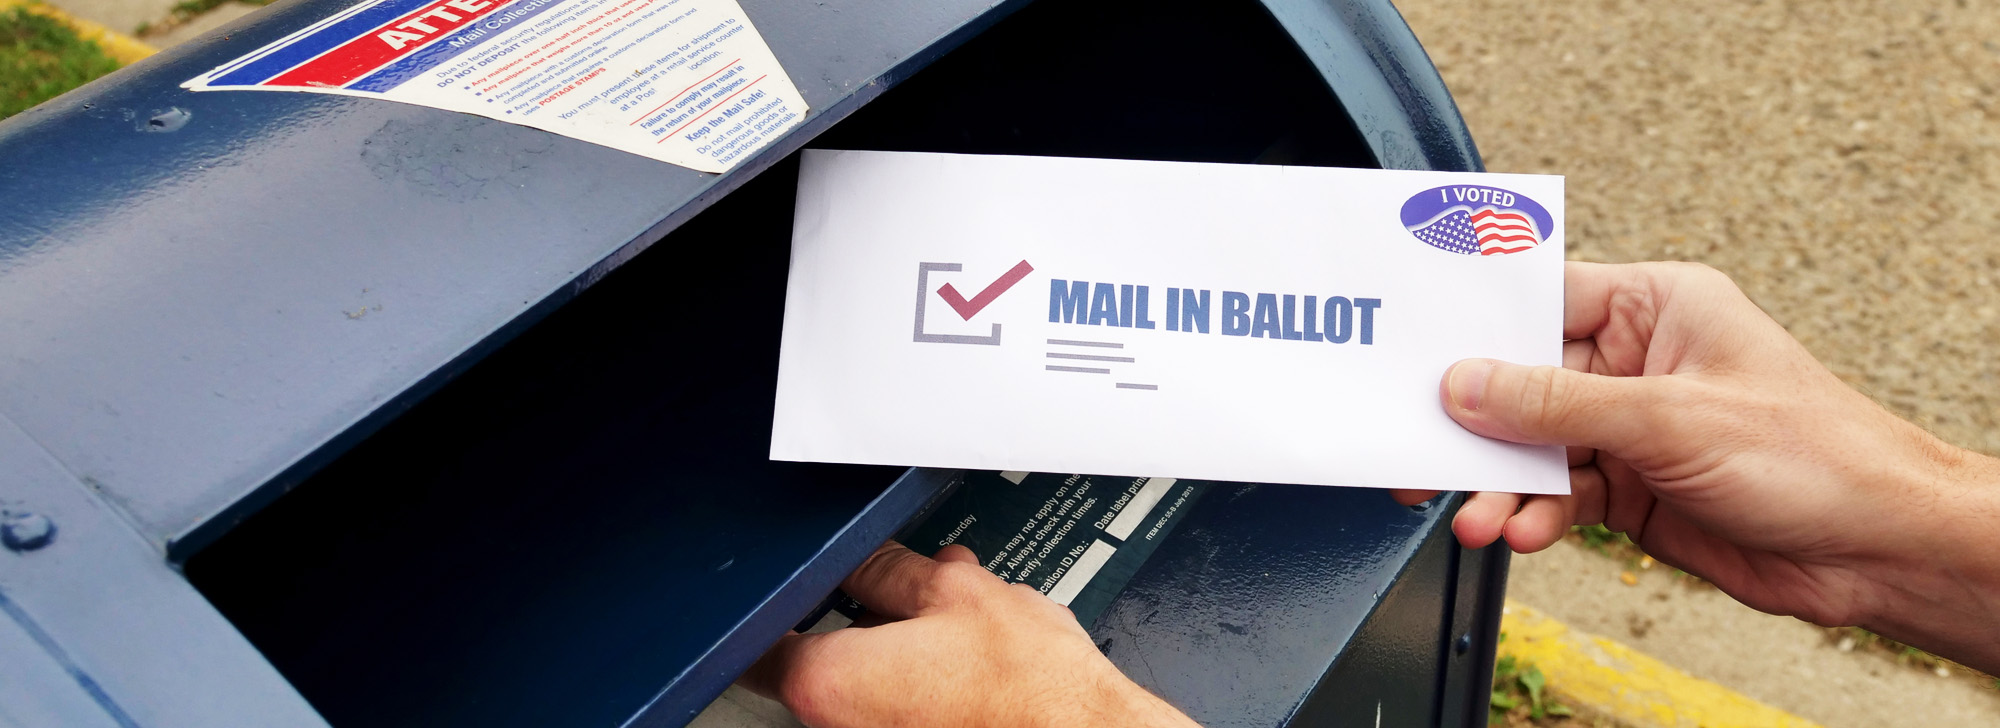 Someone drops off an envelope into a mailbox that reads "Mail In Ballot"